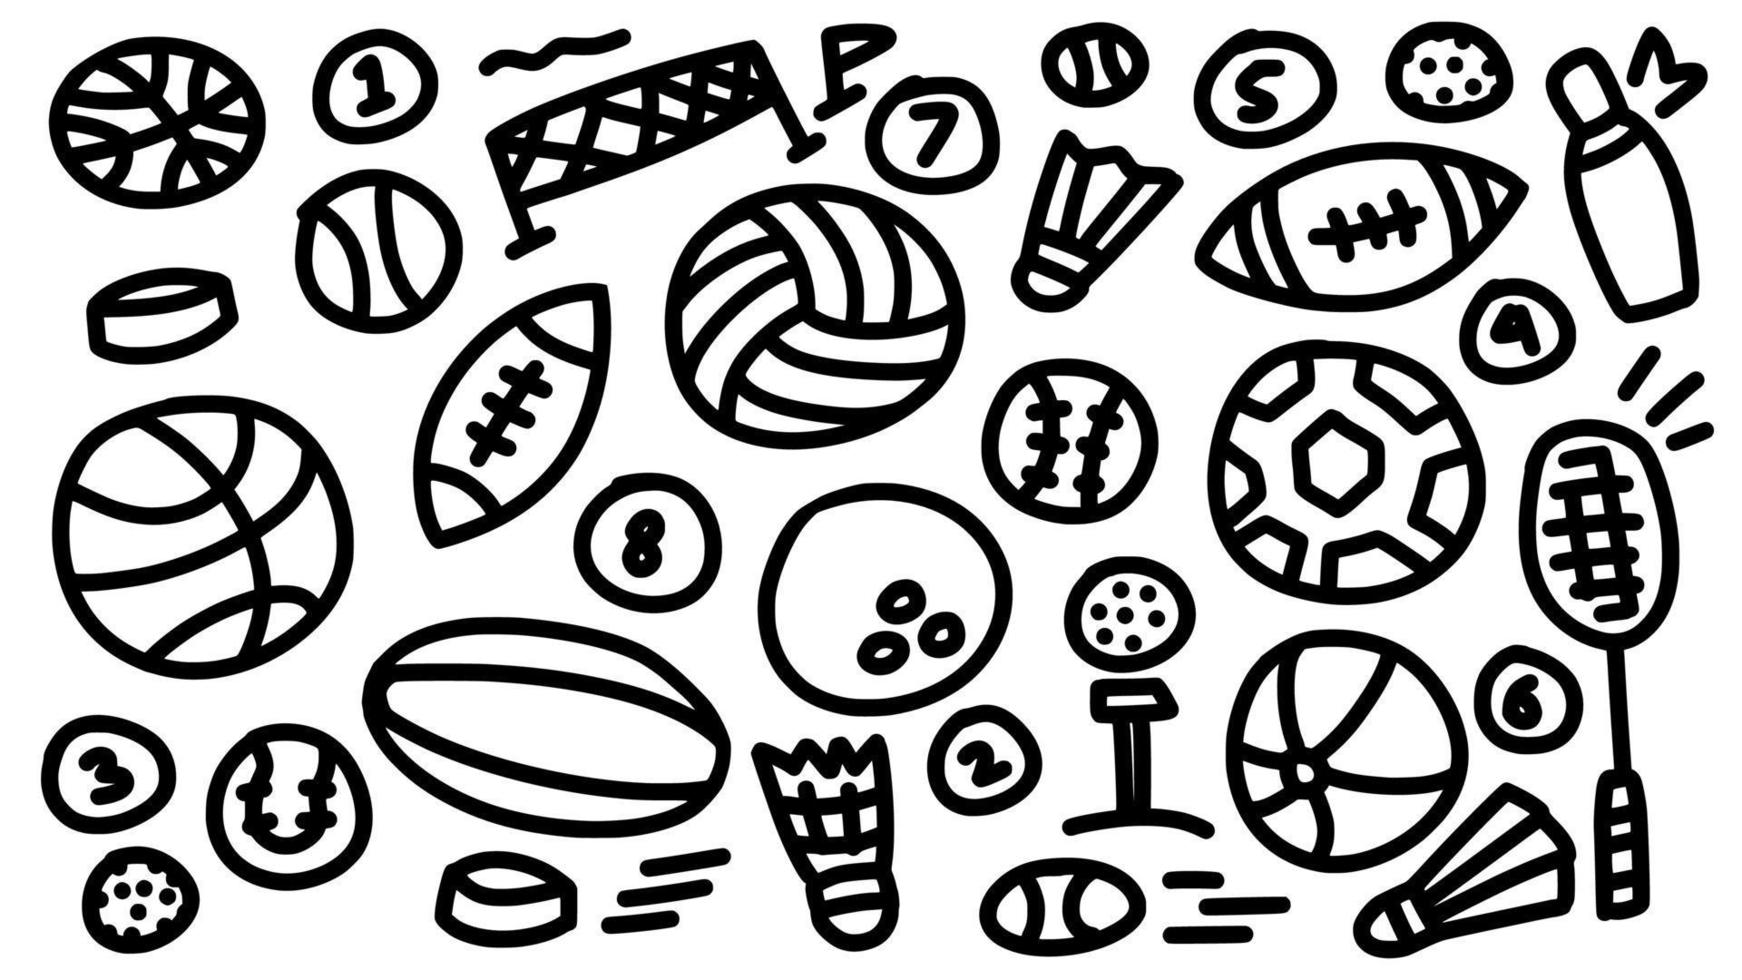 https://static.vecteezy.com/system/resources/previews/009/353/966/non_2x/ball-sport-equipment-collection-icon-set-hand-drawn-doodle-outline-template-illustration-collection-for-sport-education-and-coloring-book-vector.jpg